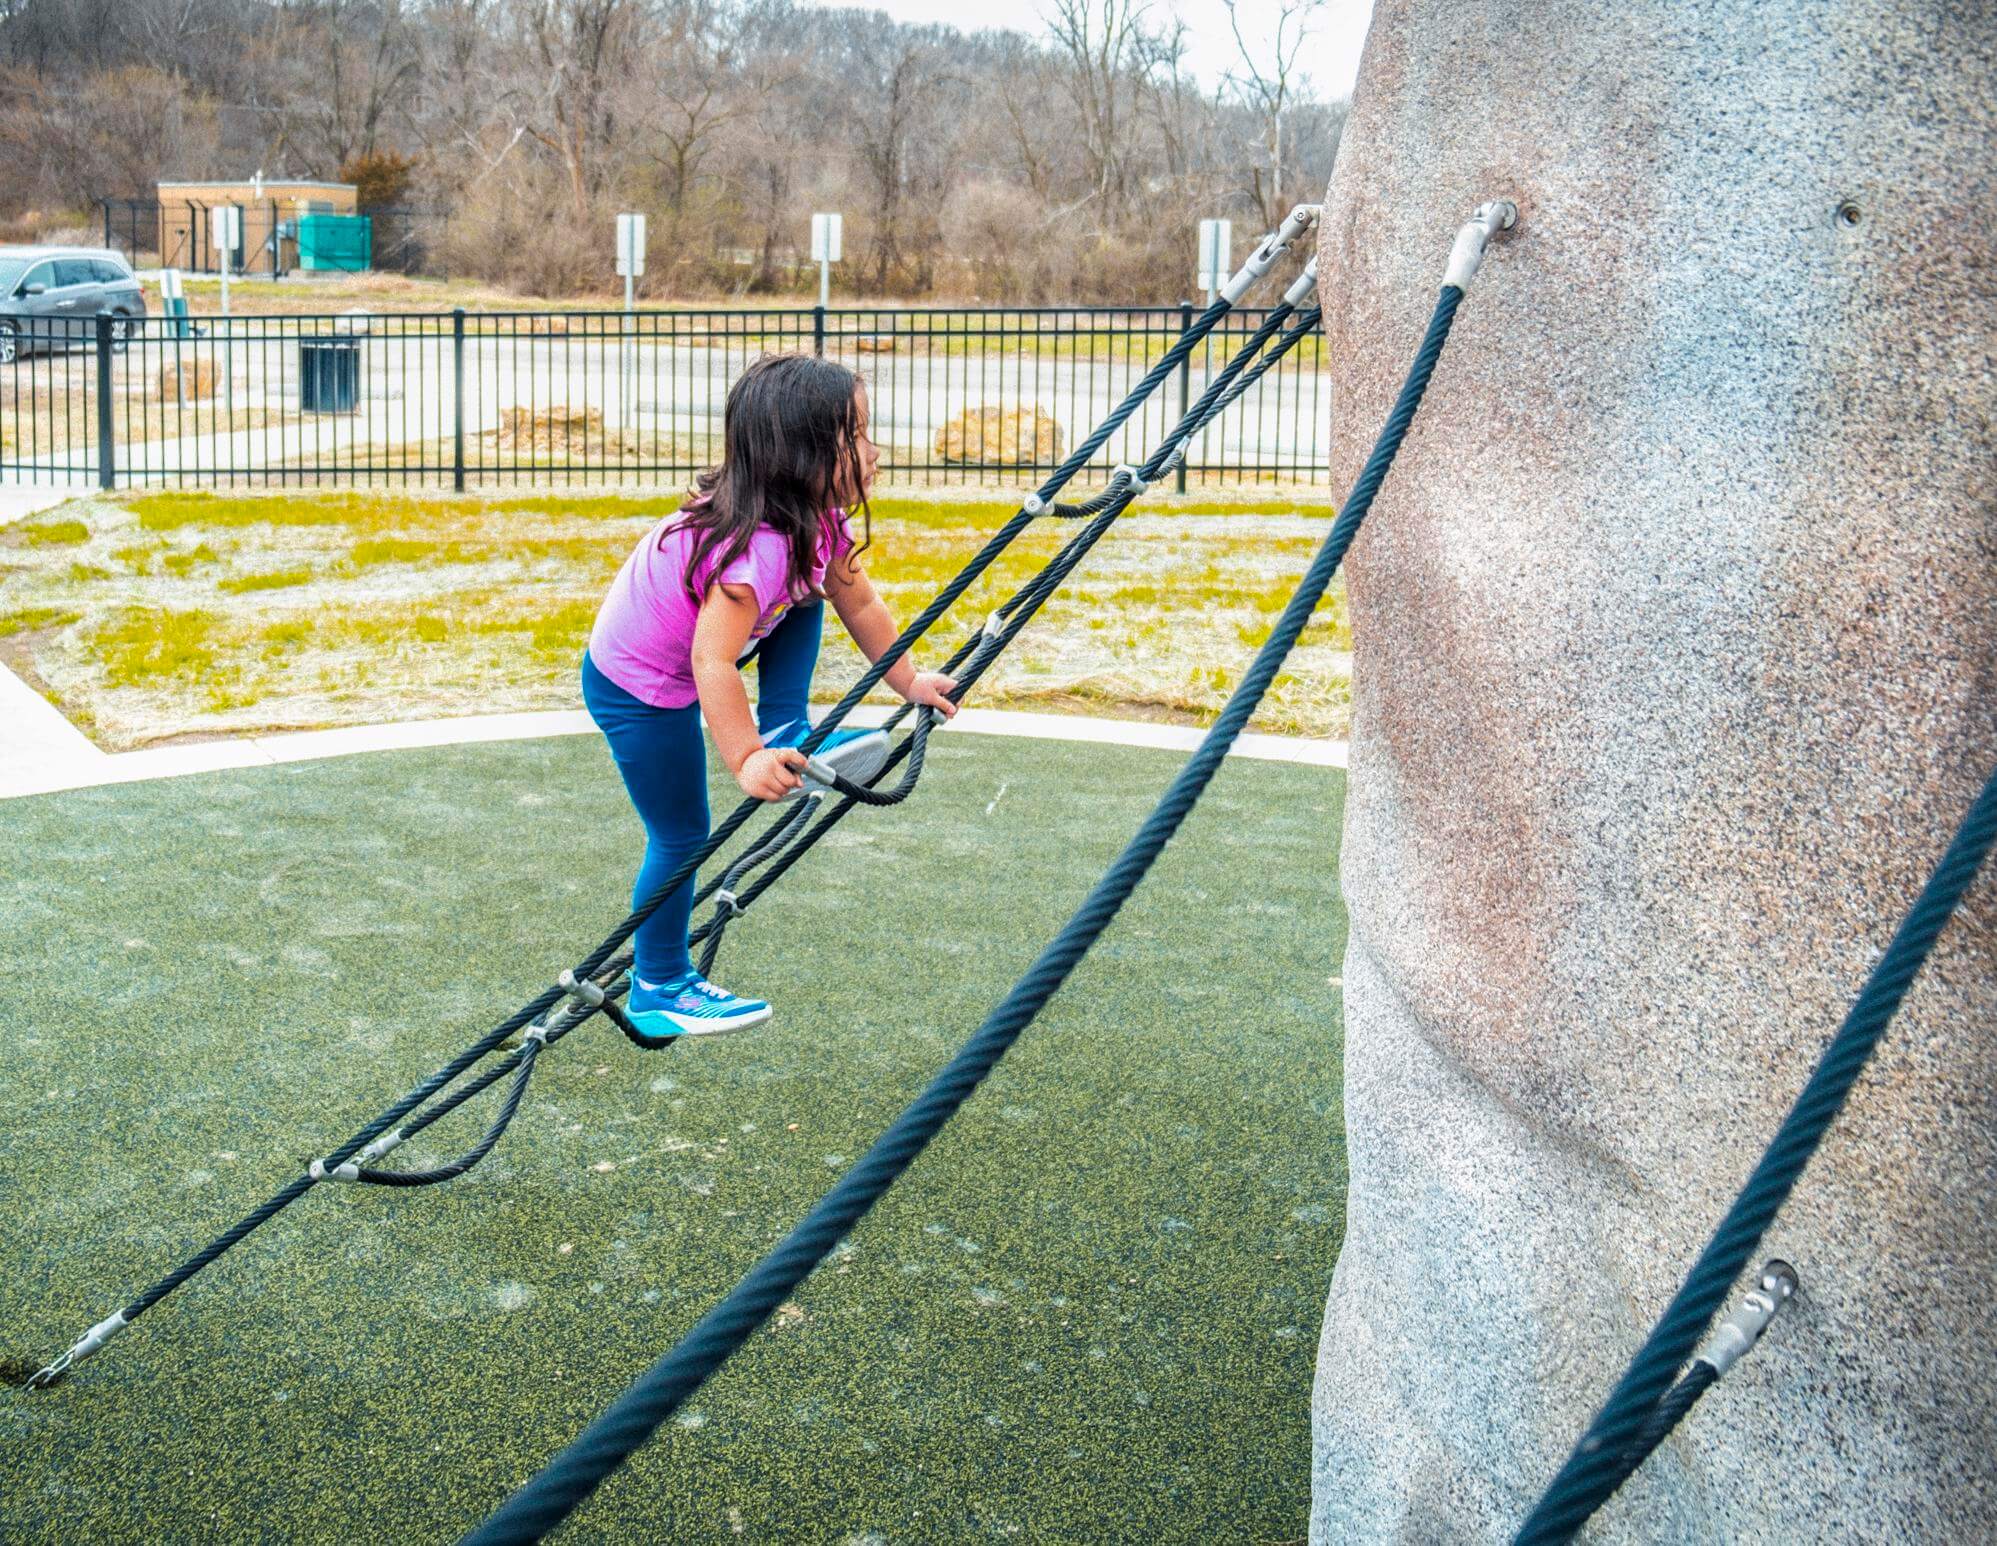 A child is focused on climbing a rope structure connected to a large, lifelike boulder in a playground. The synthetic green turf around her provides a safe playing surface.